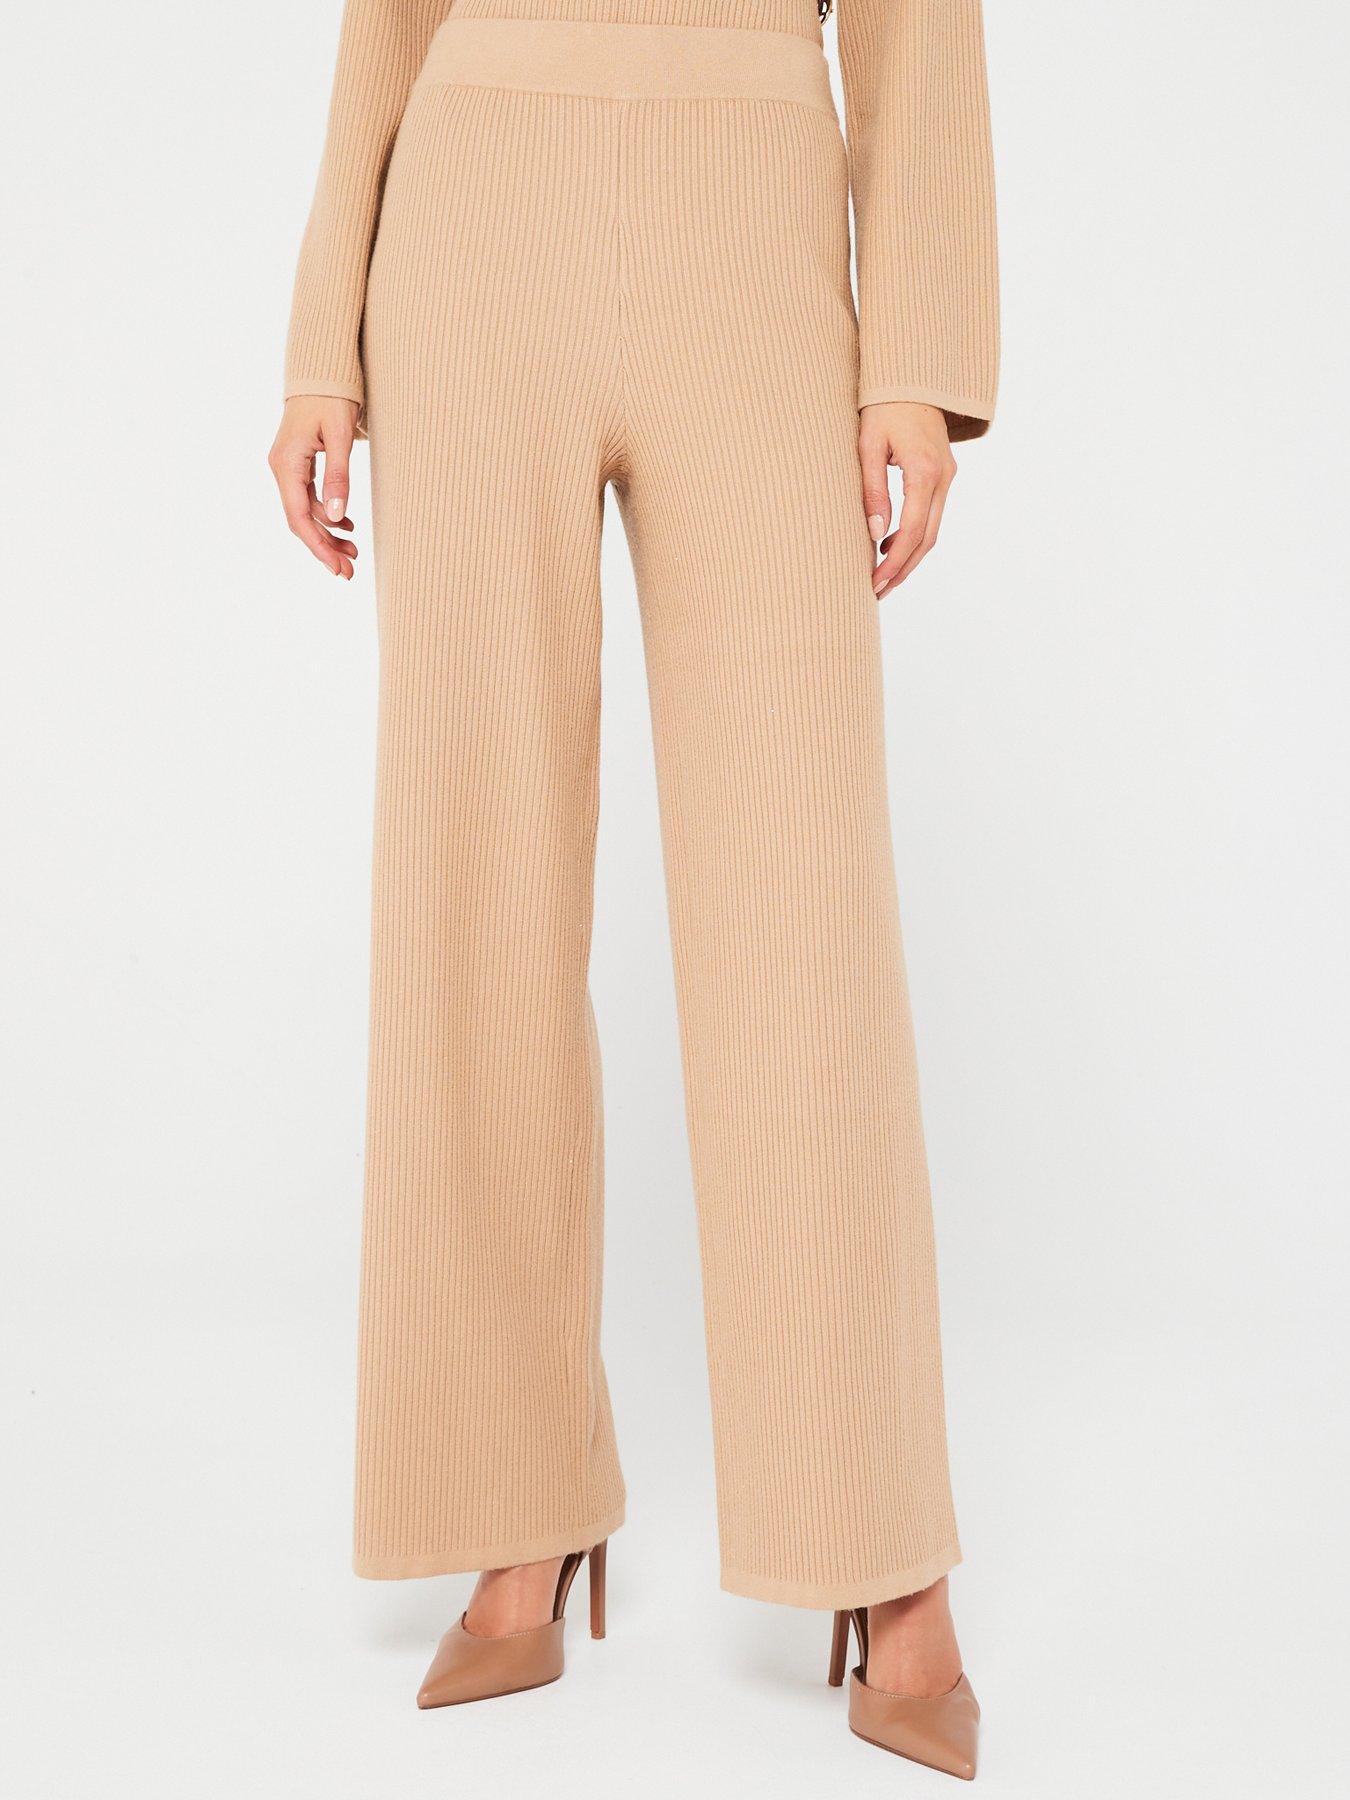 fig basil knitted ribbed wide legnbspco ord trousers nbsp